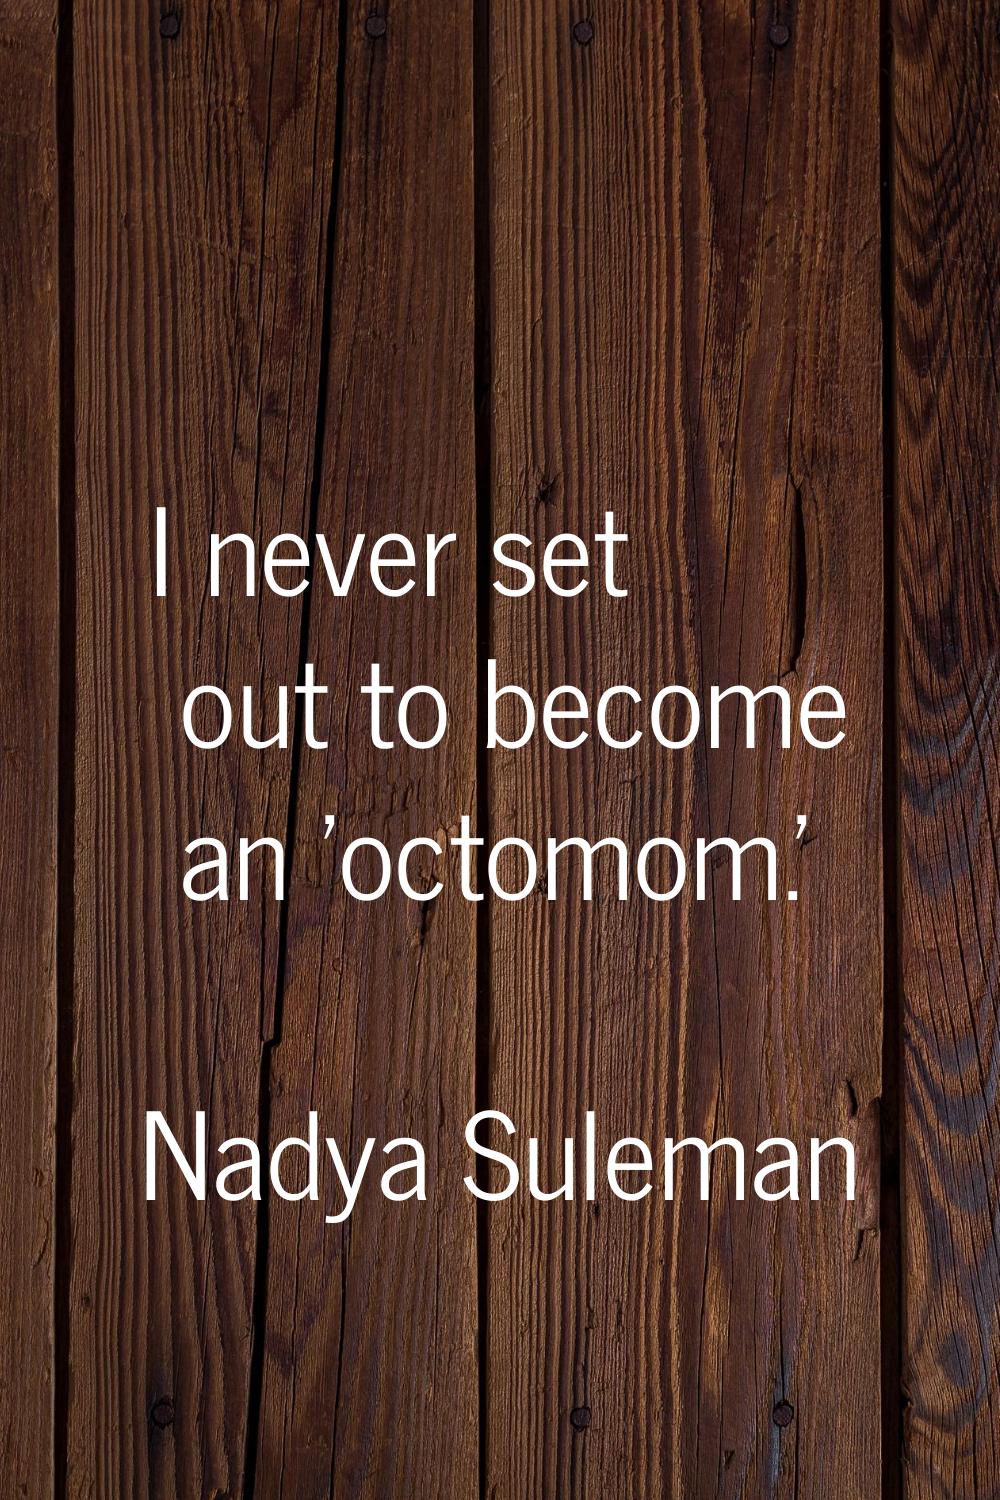 I never set out to become an 'octomom.'